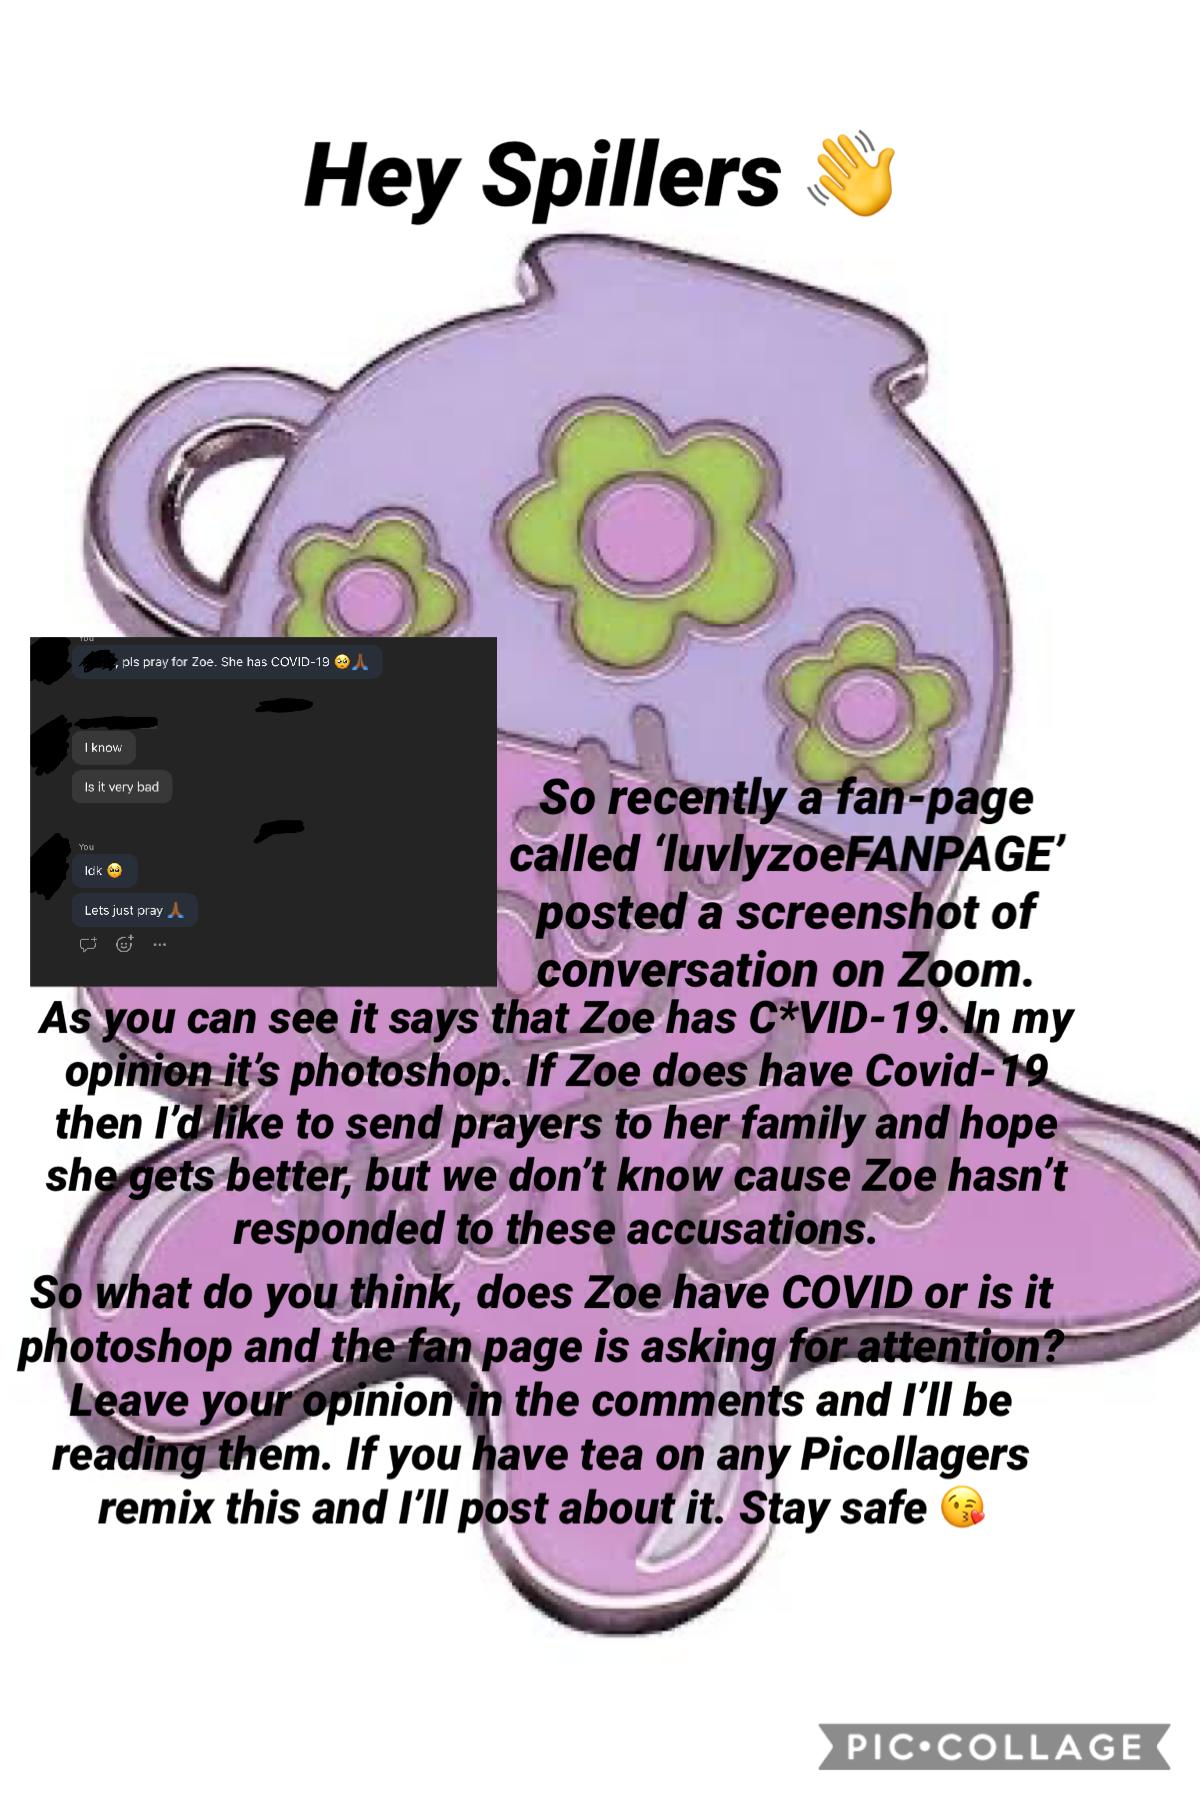 What do you think? Do you think Zoe does have COVID or is it another troll spamming the internet? Tell me in the comments. Stay safe 🫖